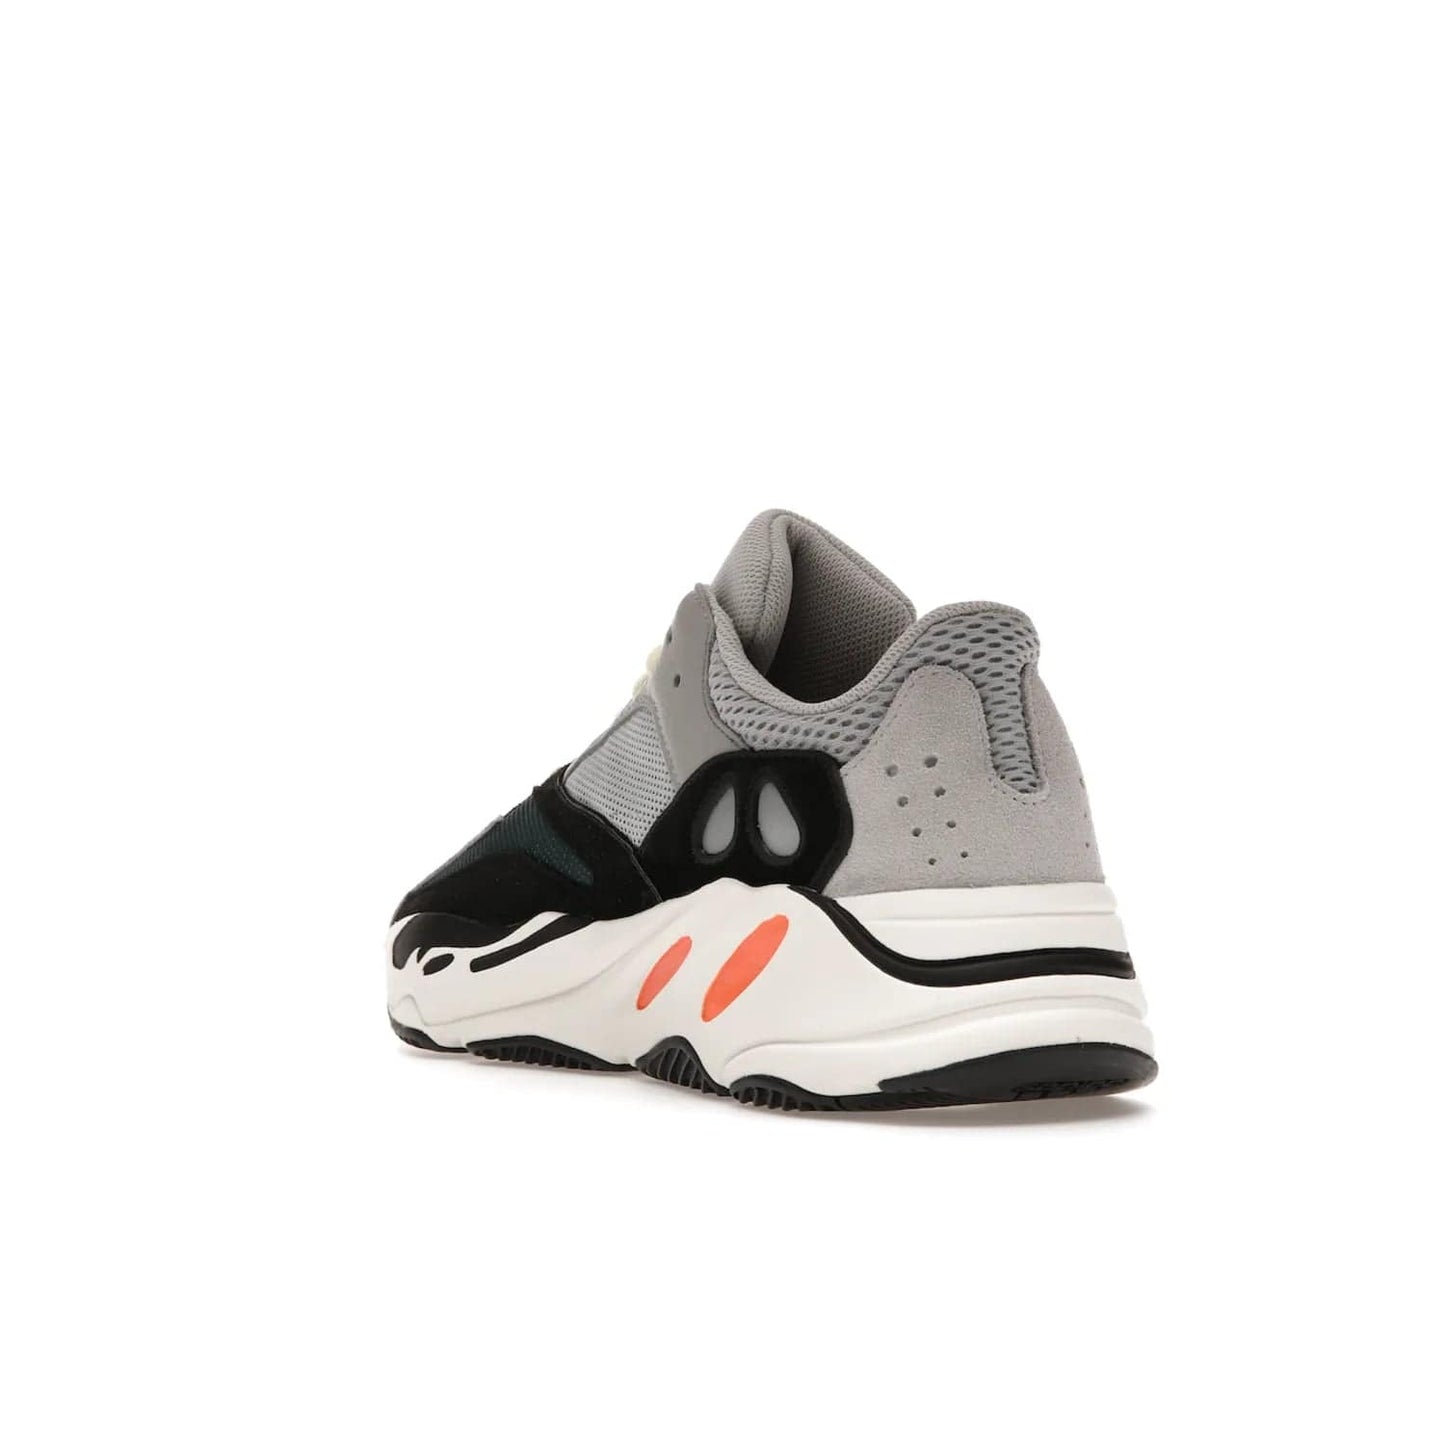 adidas Yeezy Boost 700 Wave Runner - Image 25 - Only at www.BallersClubKickz.com - Shop the iconic adidas Yeezy Boost 700 Wave Runner. Featuring grey mesh and leather upper, black suede overlays, teal mesh underlays, and signature Boost sole. Be bold & make a statement.